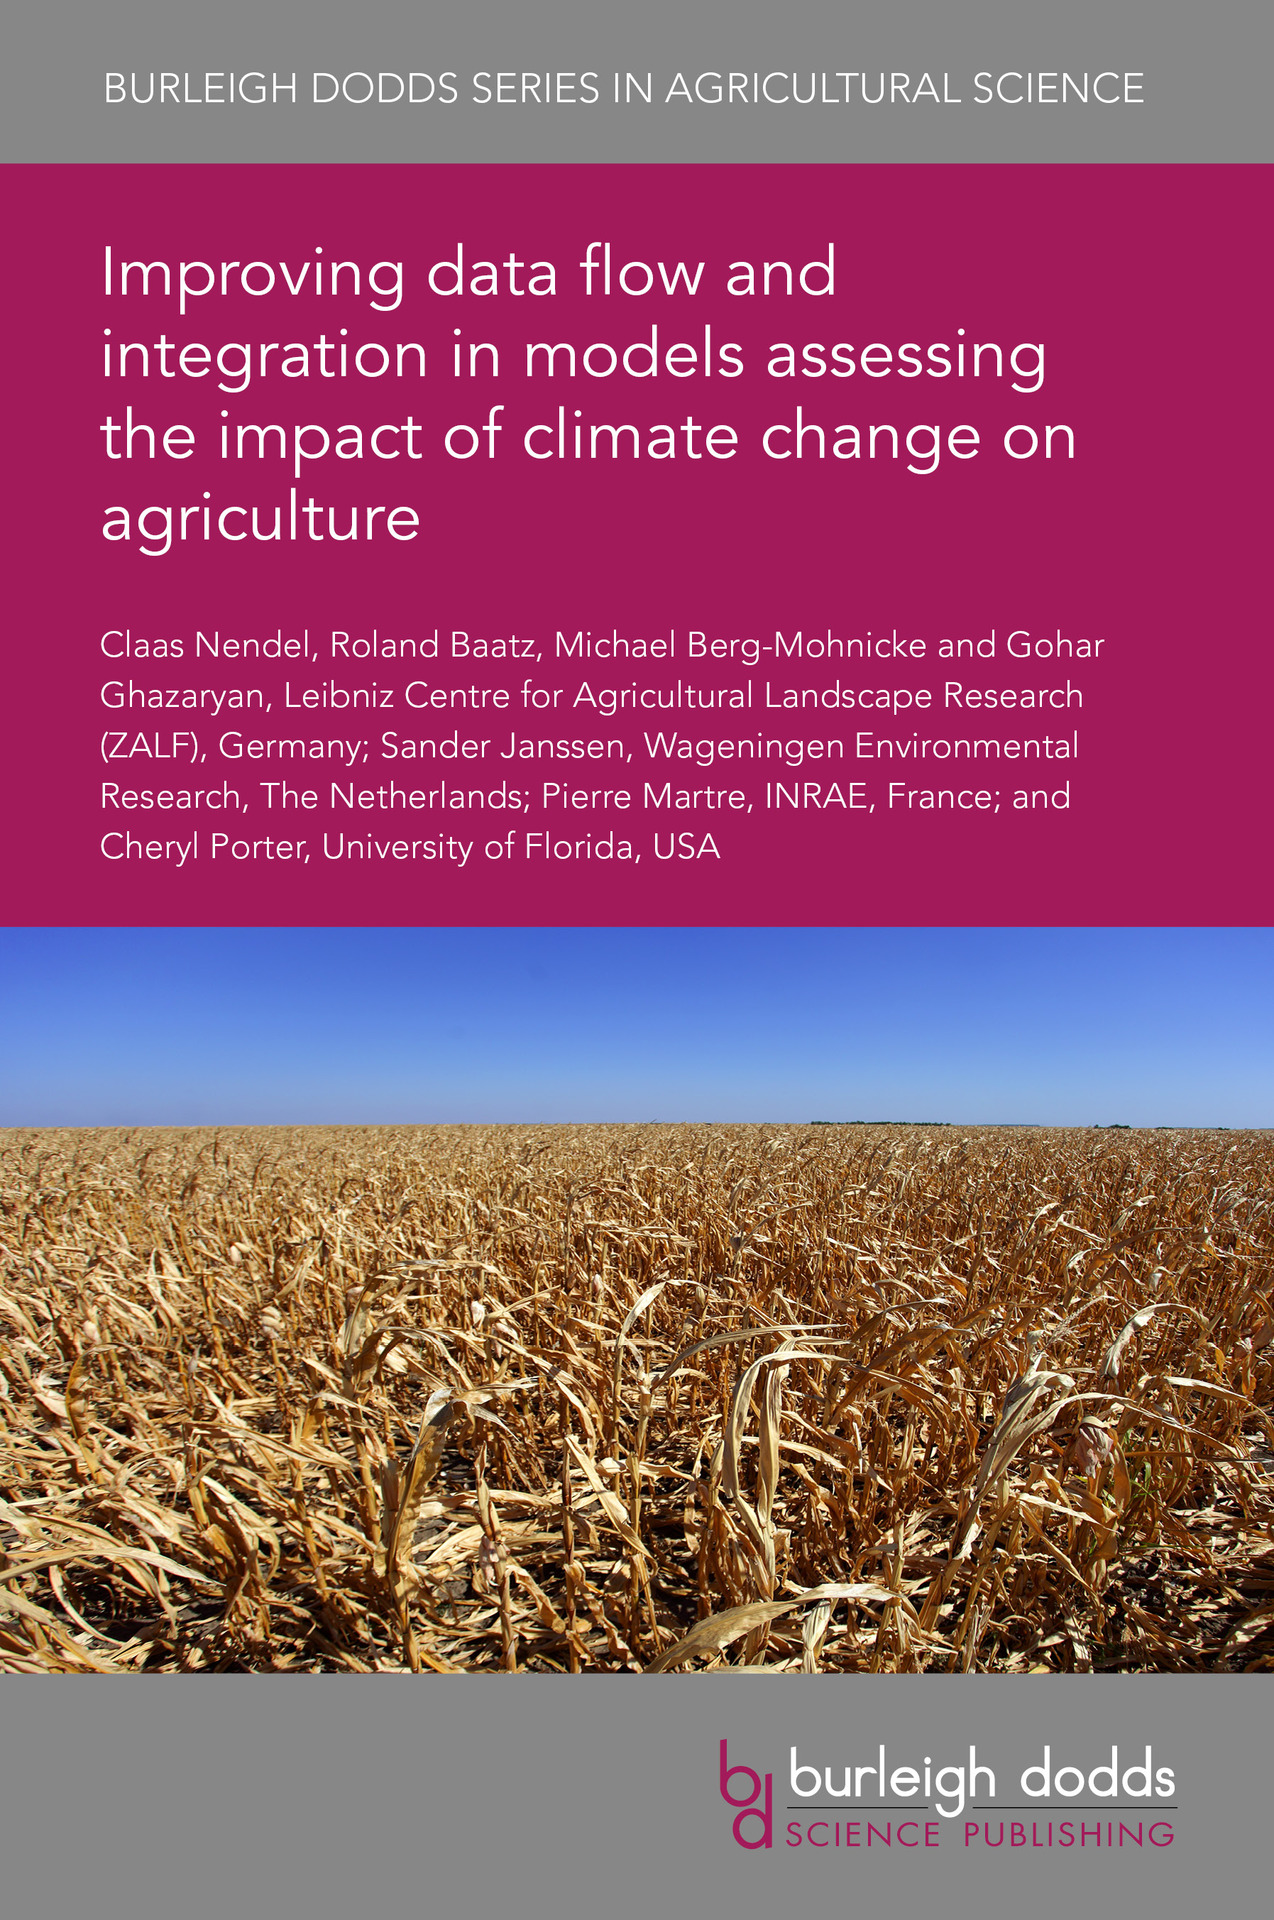 Improving data flow and integration in models assessing the impact of climate change on agriculture